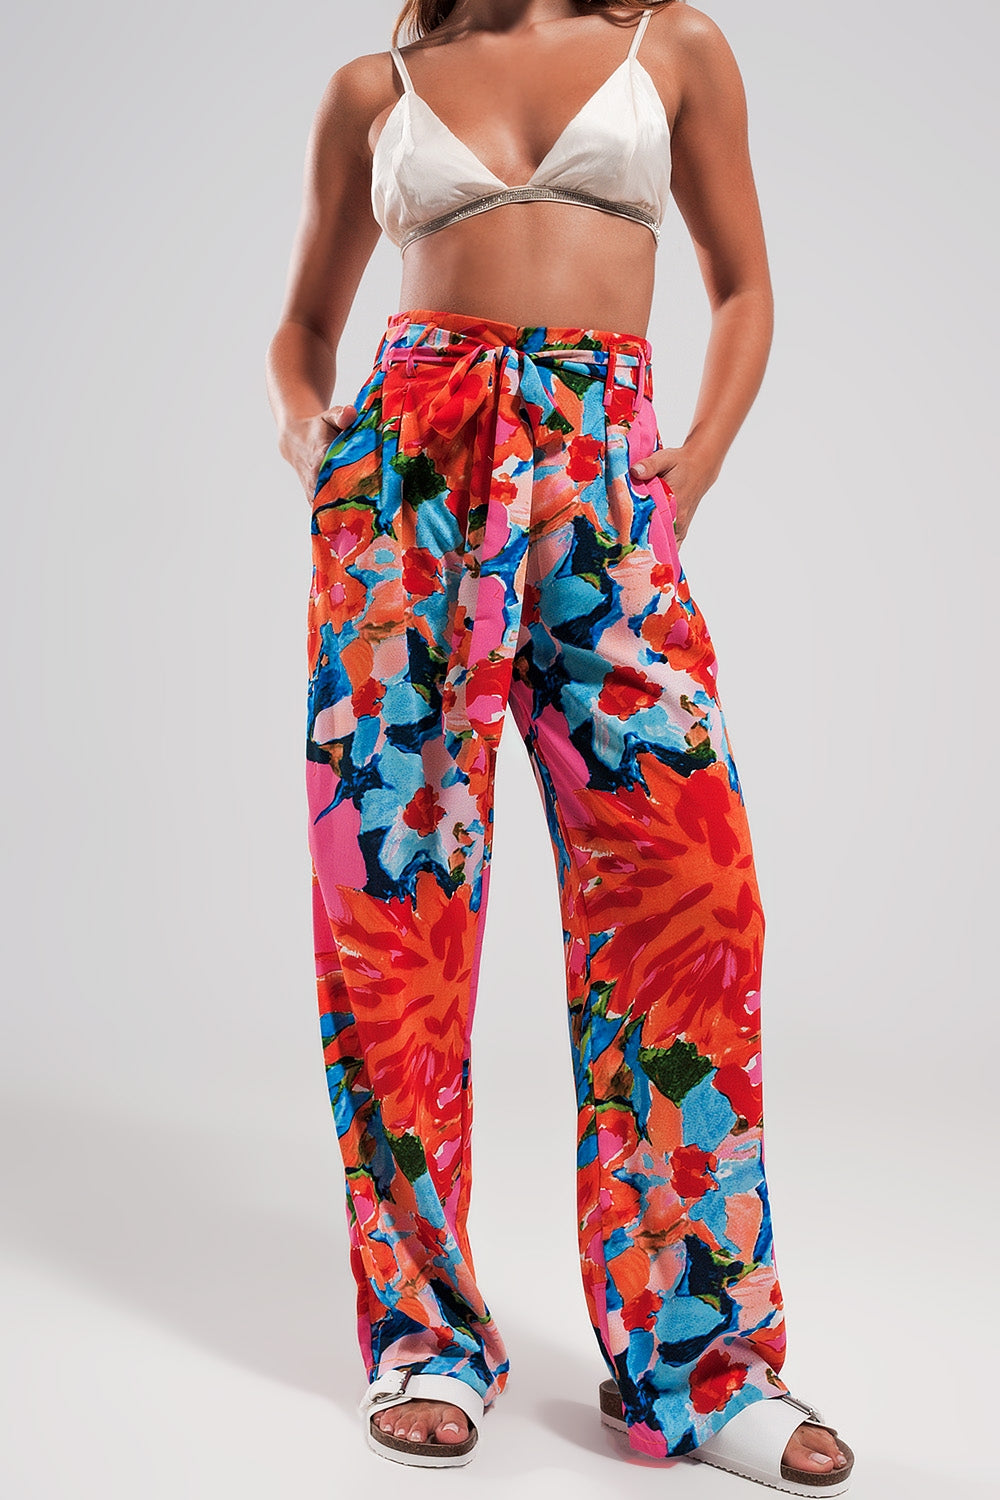 Elastic back pants in bright floral